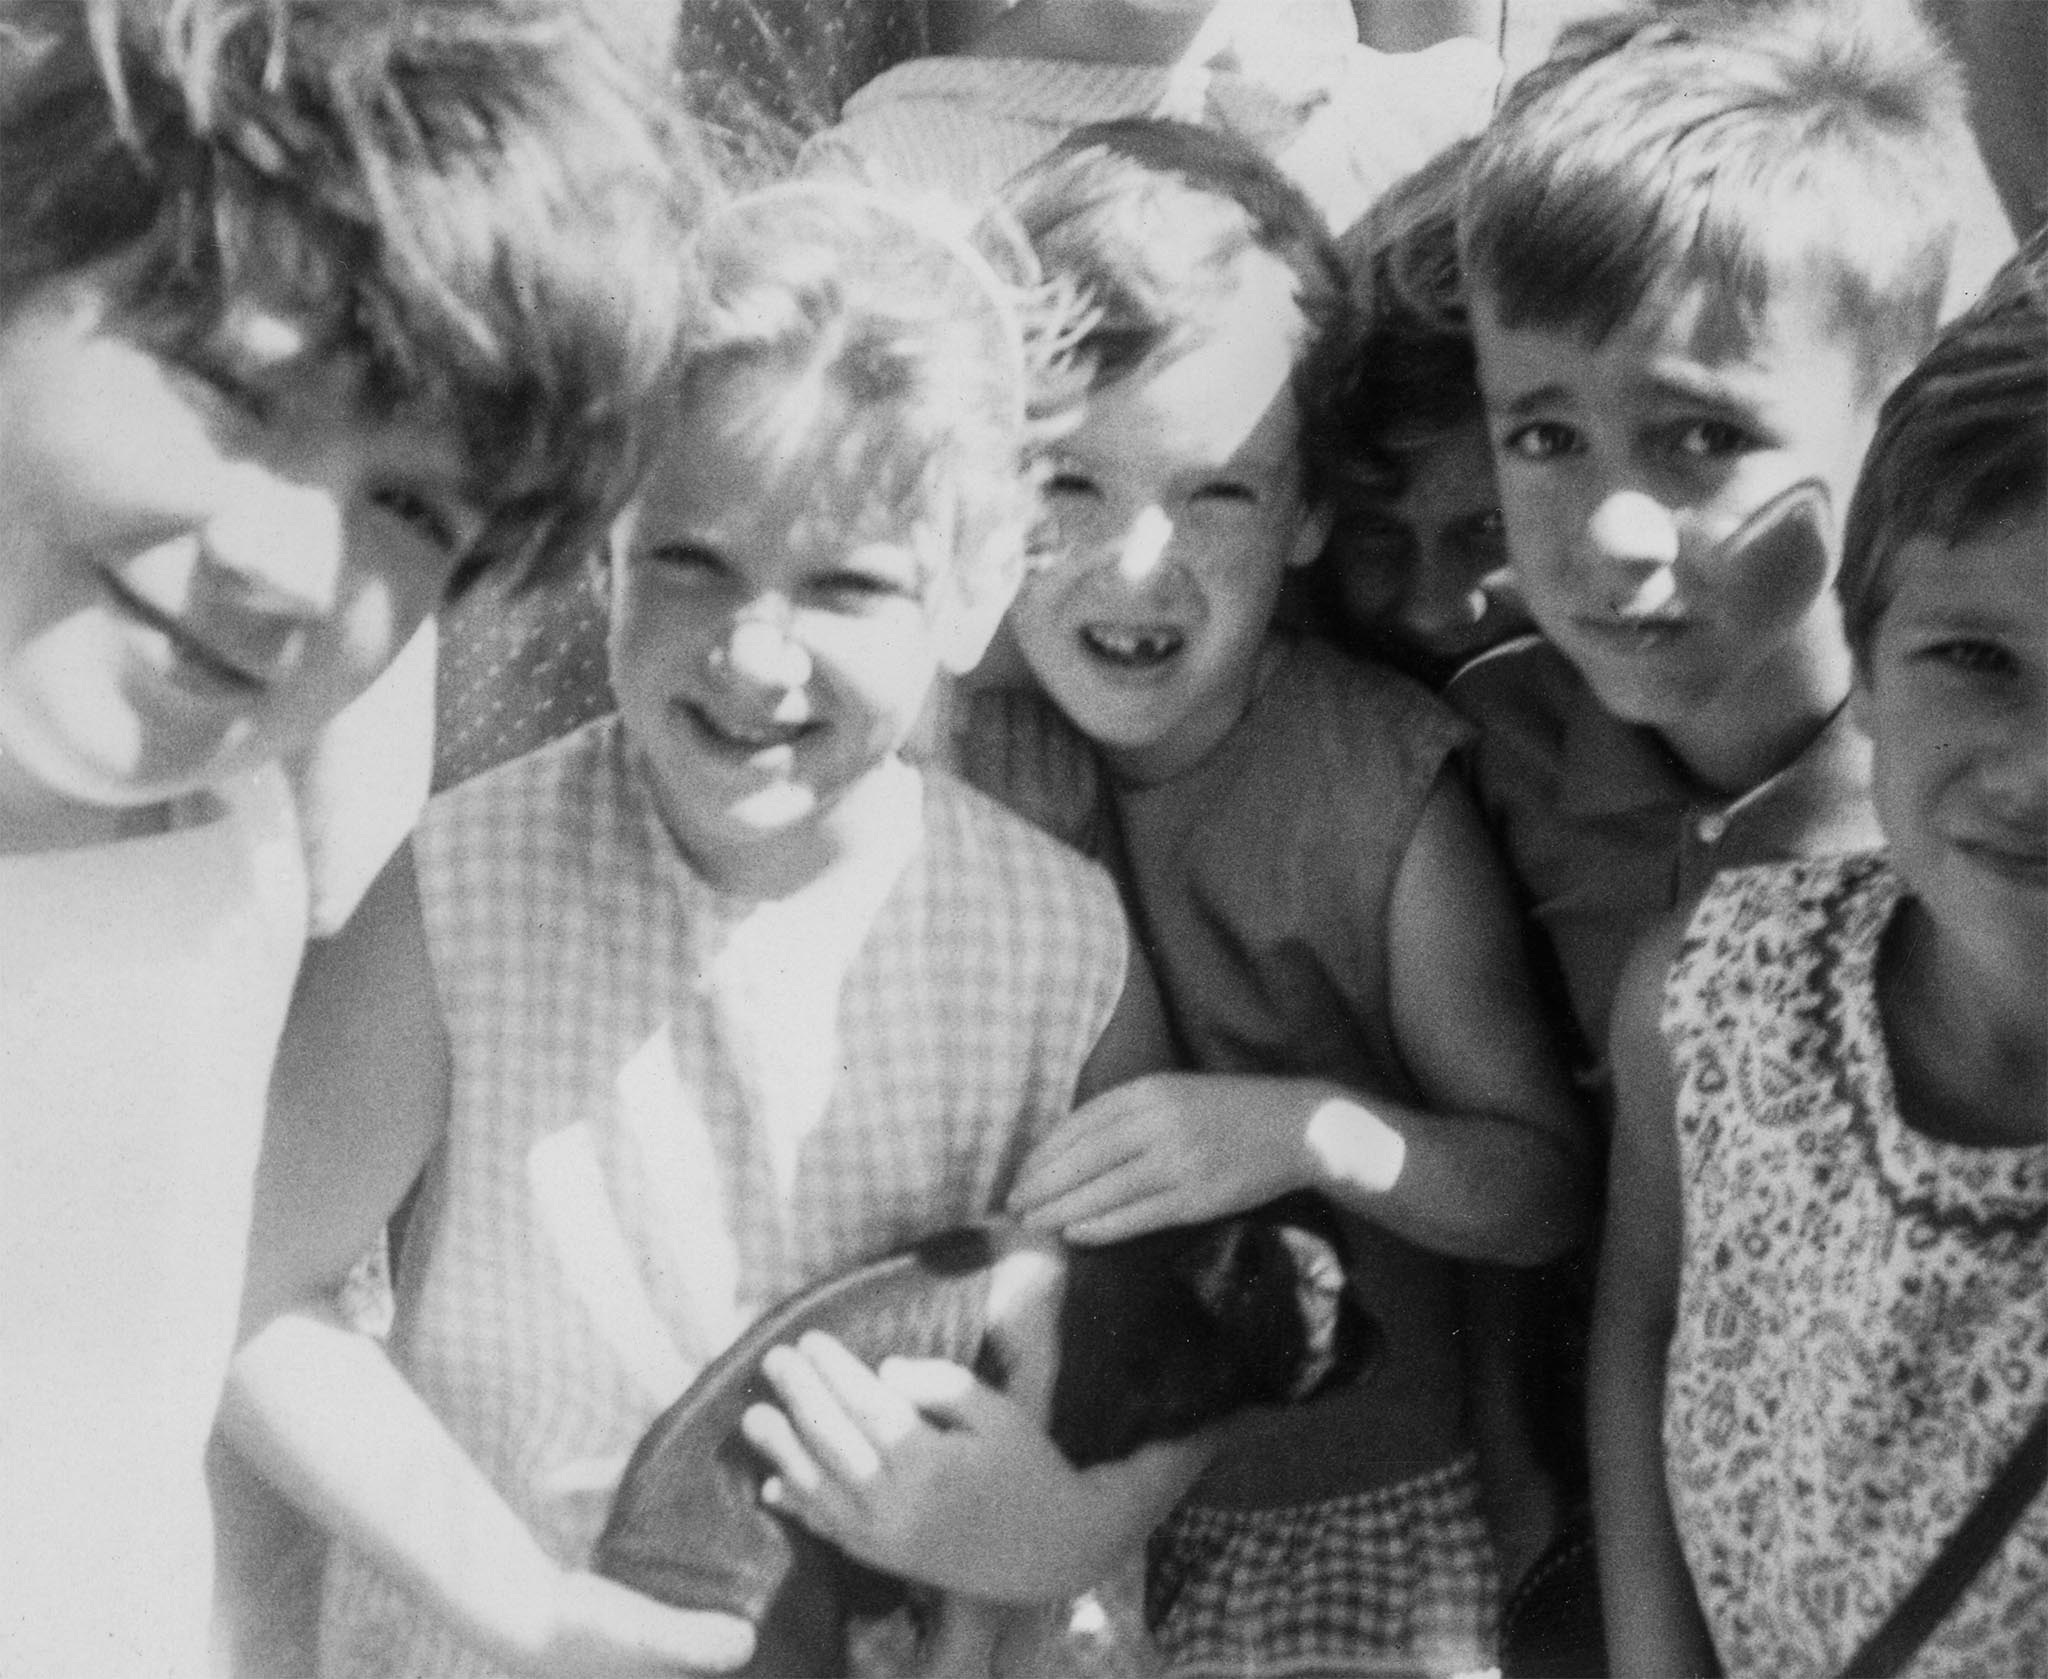 As part of a public relations program of Oklahoma County Farm Bureau, OKFB member Roger Murphy invited groups of children from Midwest City to visit his farm west of Edmond in 1969. Most of the children who came had never been close to a pig before.